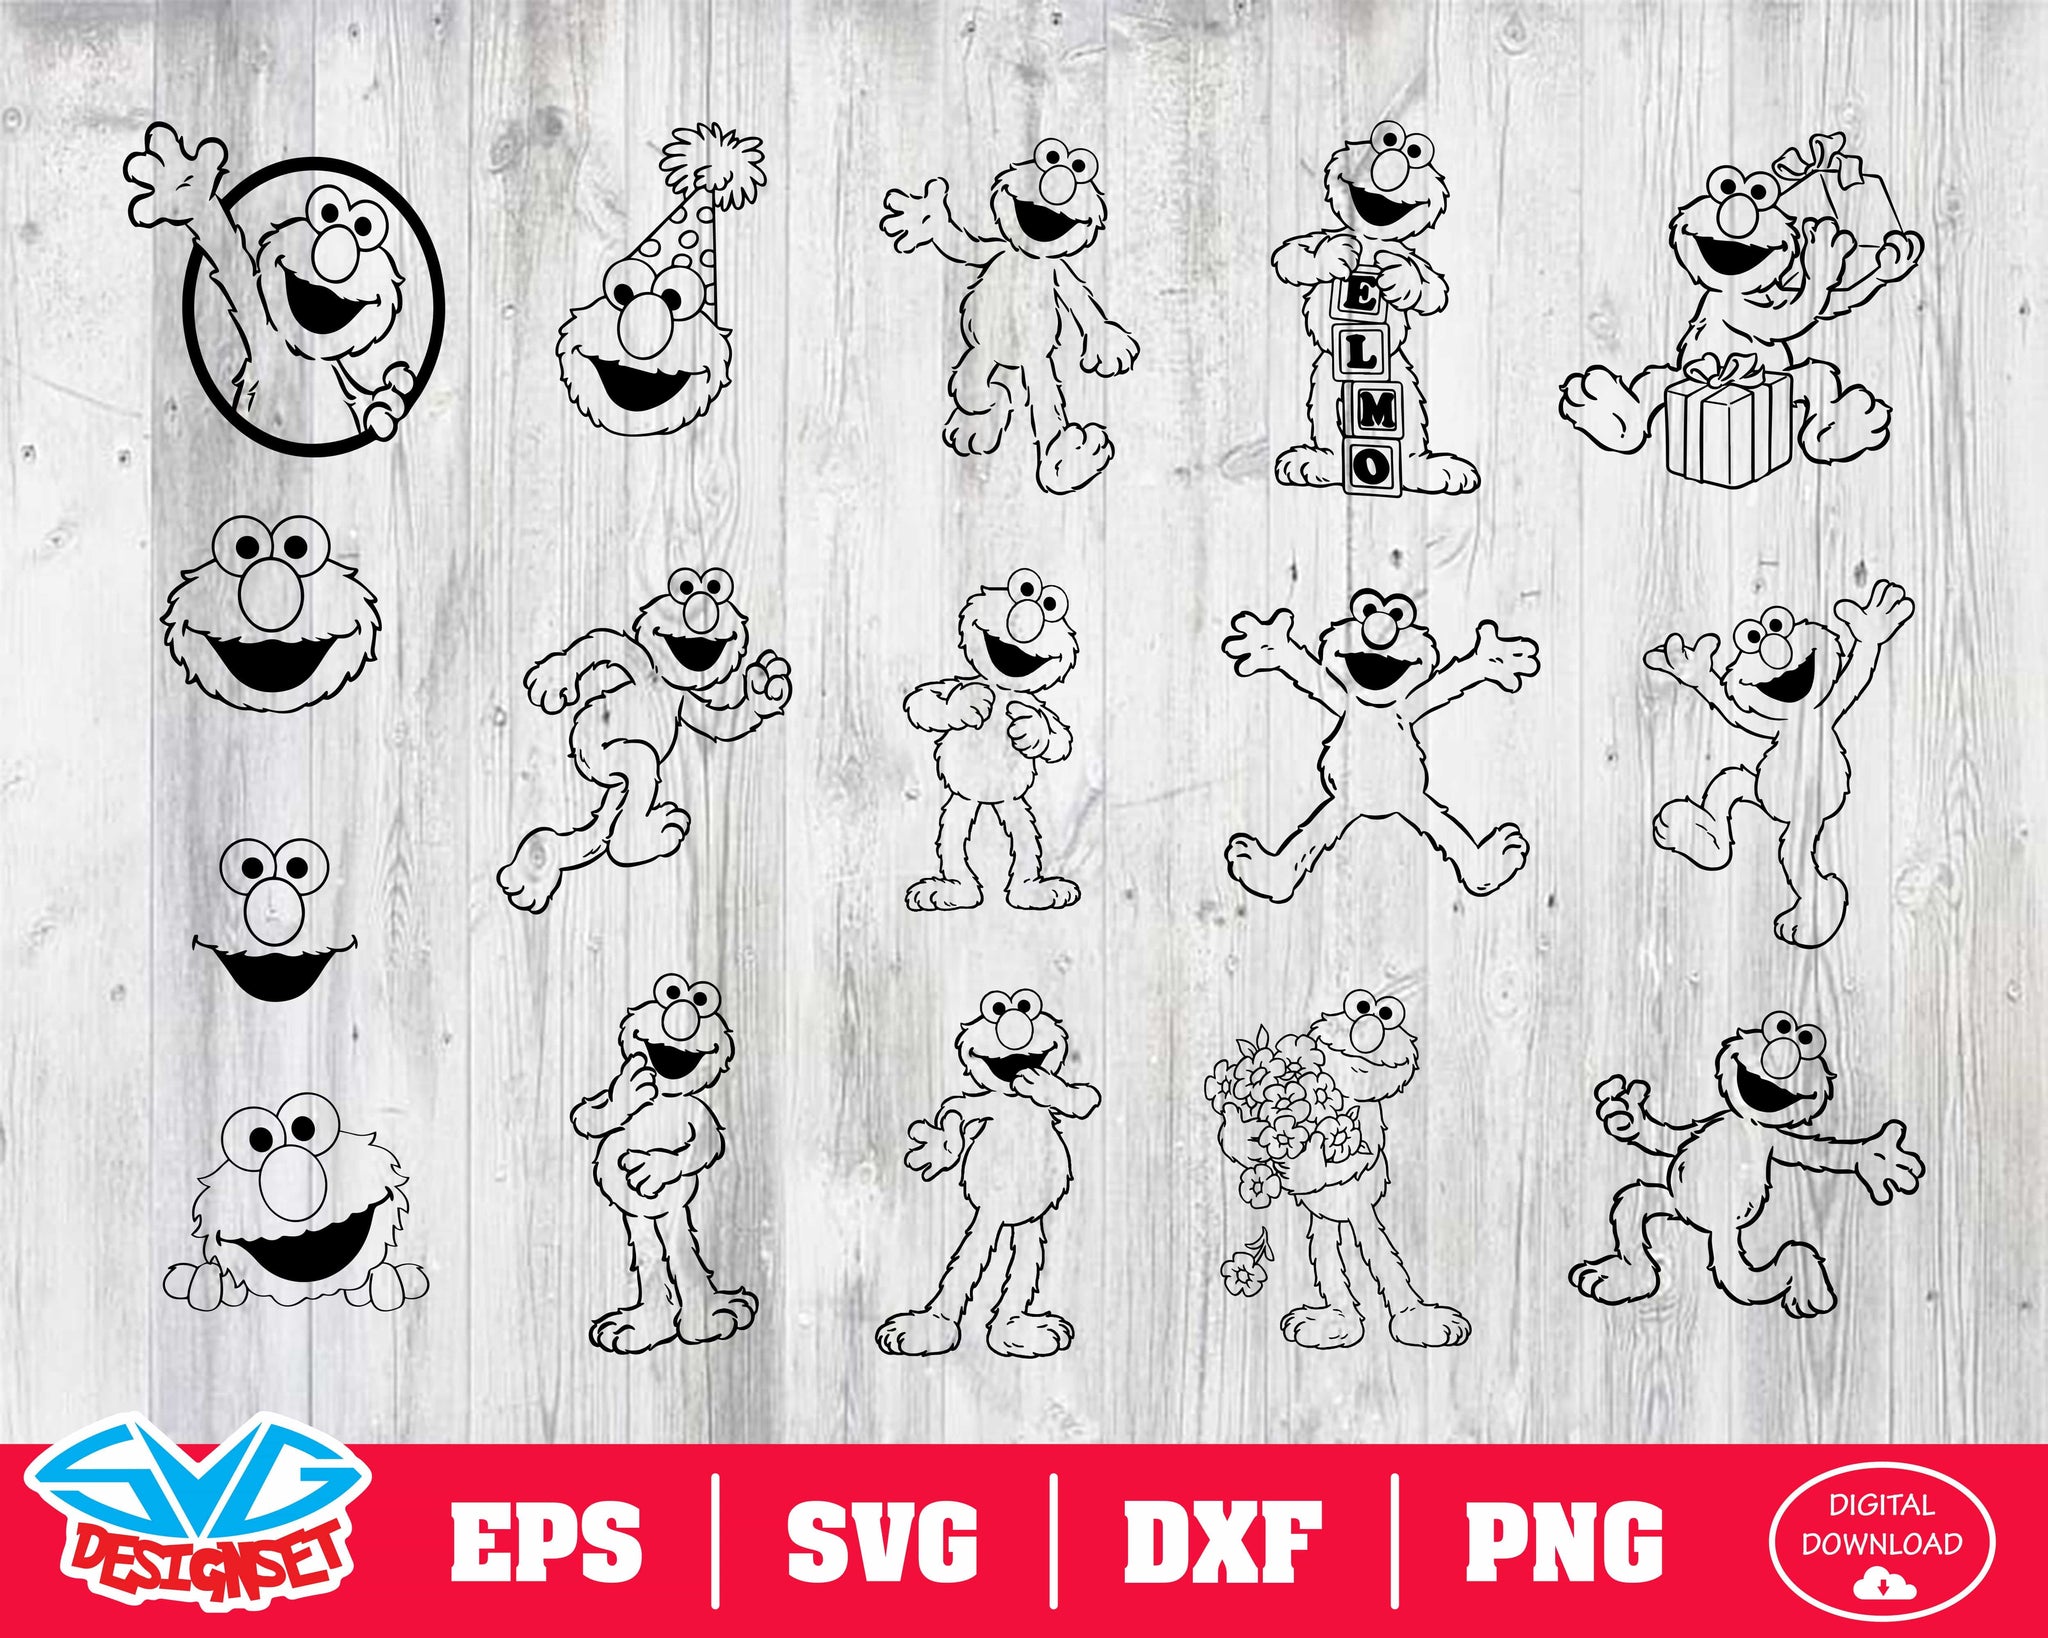 Elmo Svg, Dxf, Eps, Png, Clipart, Silhouette and Cutfiles #2 - SVGDesignSets